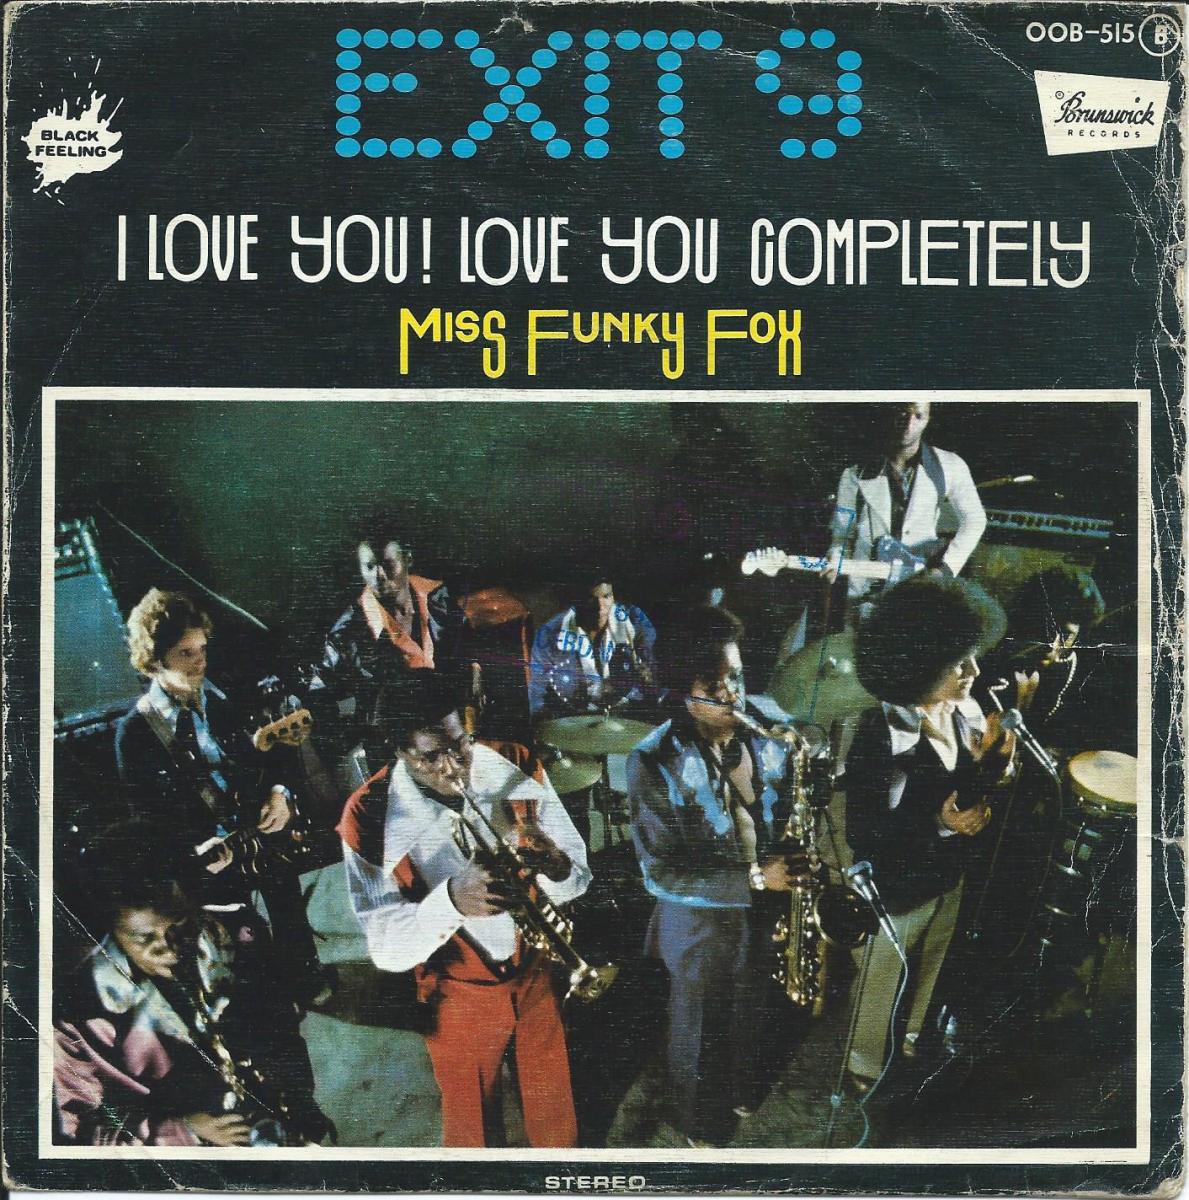 EXIT 9 / I LOVE YOU! LOVE YOU COMPLETELY / MISS FUNKY FOX (7